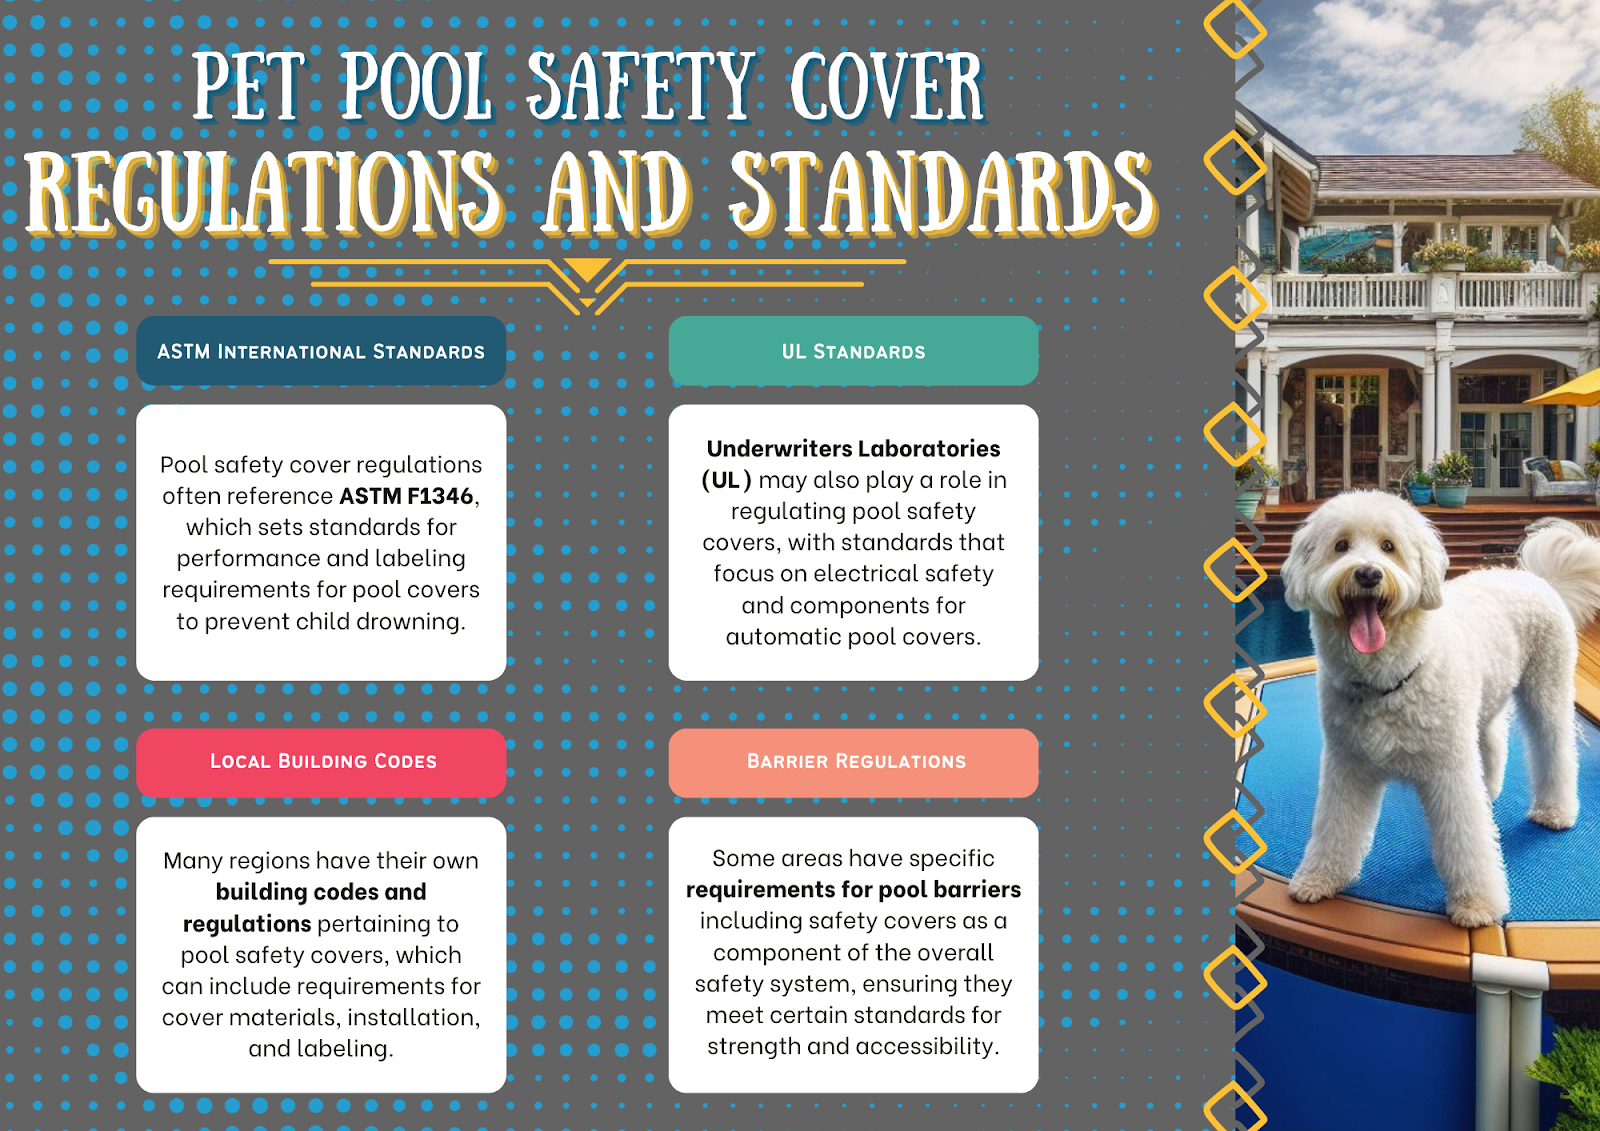 Pet and Pool Safety Covers - Pet Pool Safety Cover Regulations and Standards